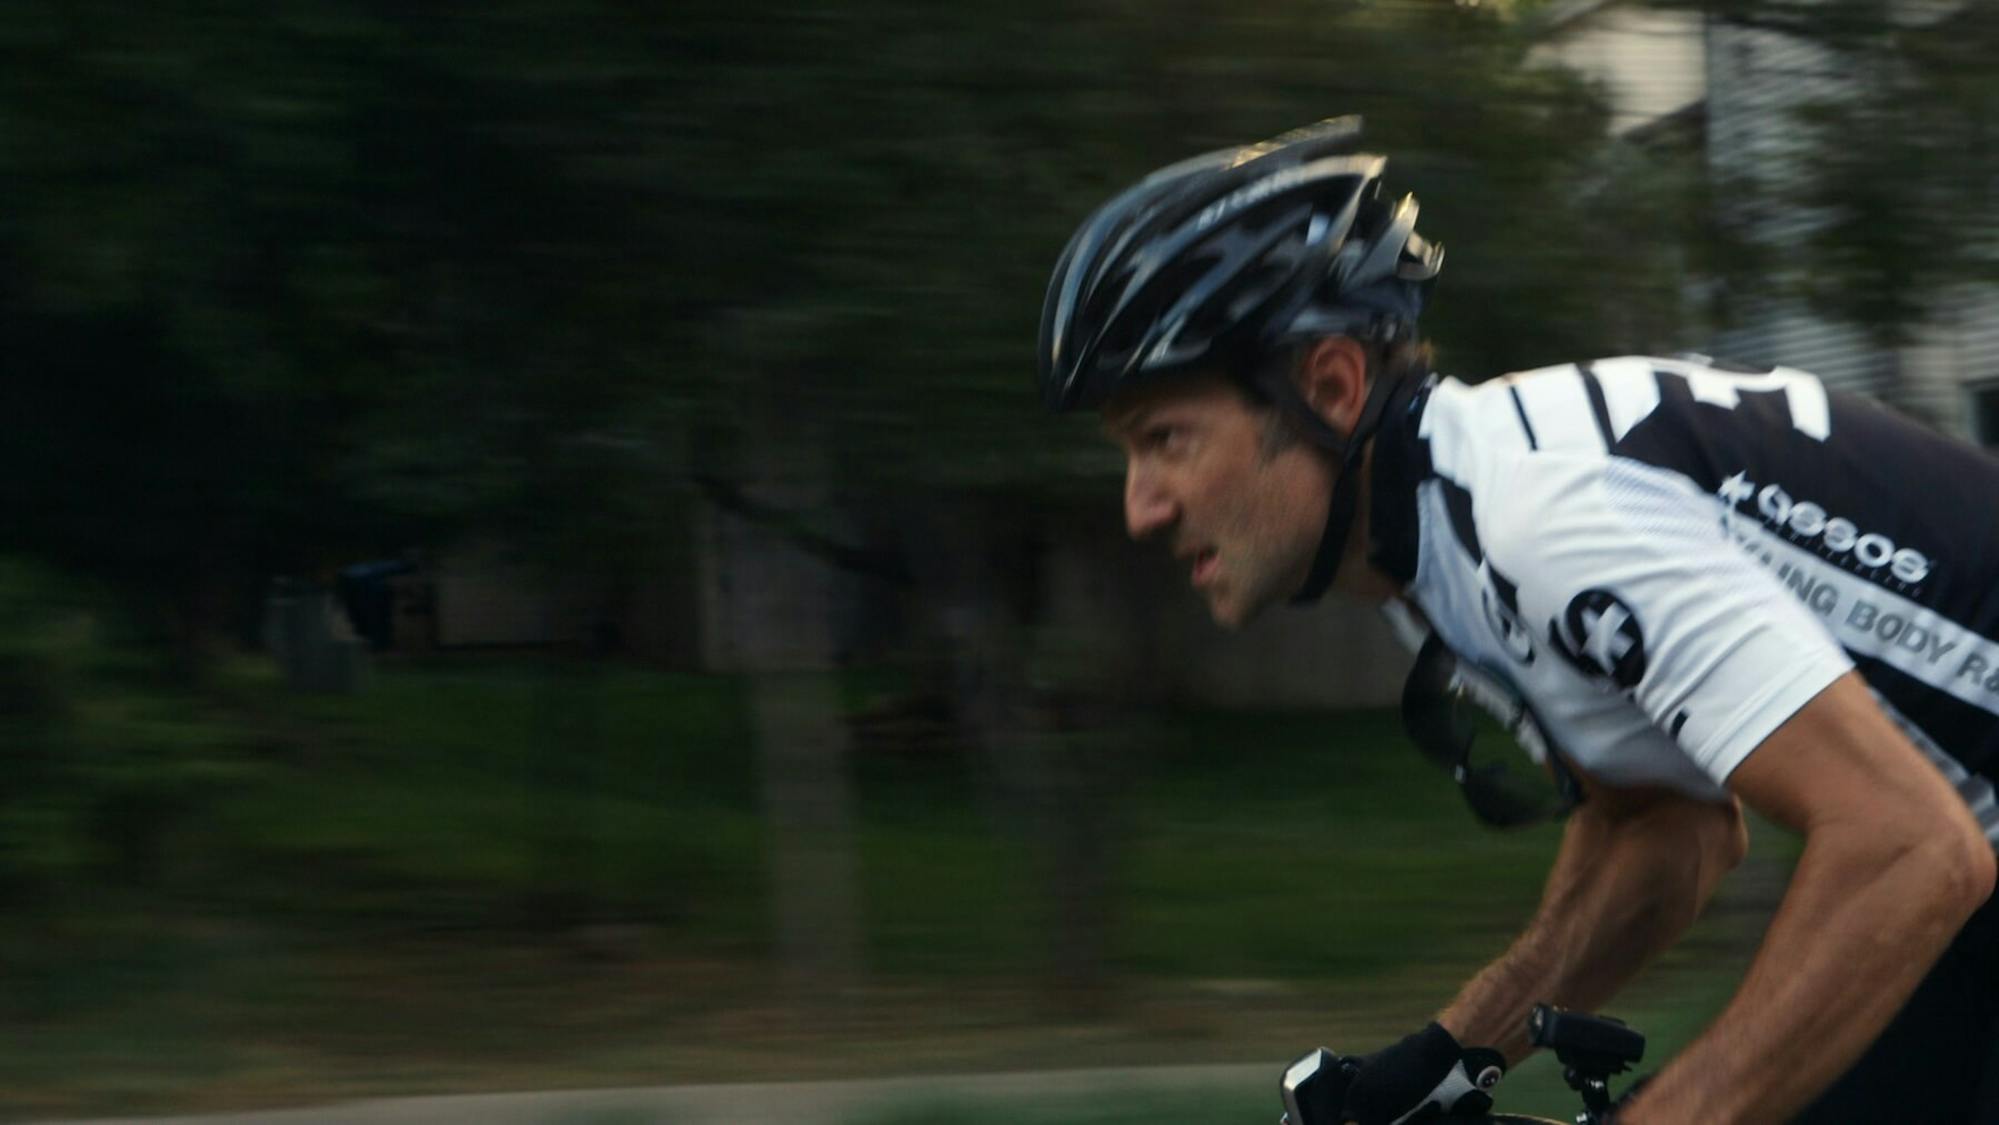 Bryan Fogel speeds by greenery on a bike. His shirt is black and white and his helmet is also black. He looks intense!